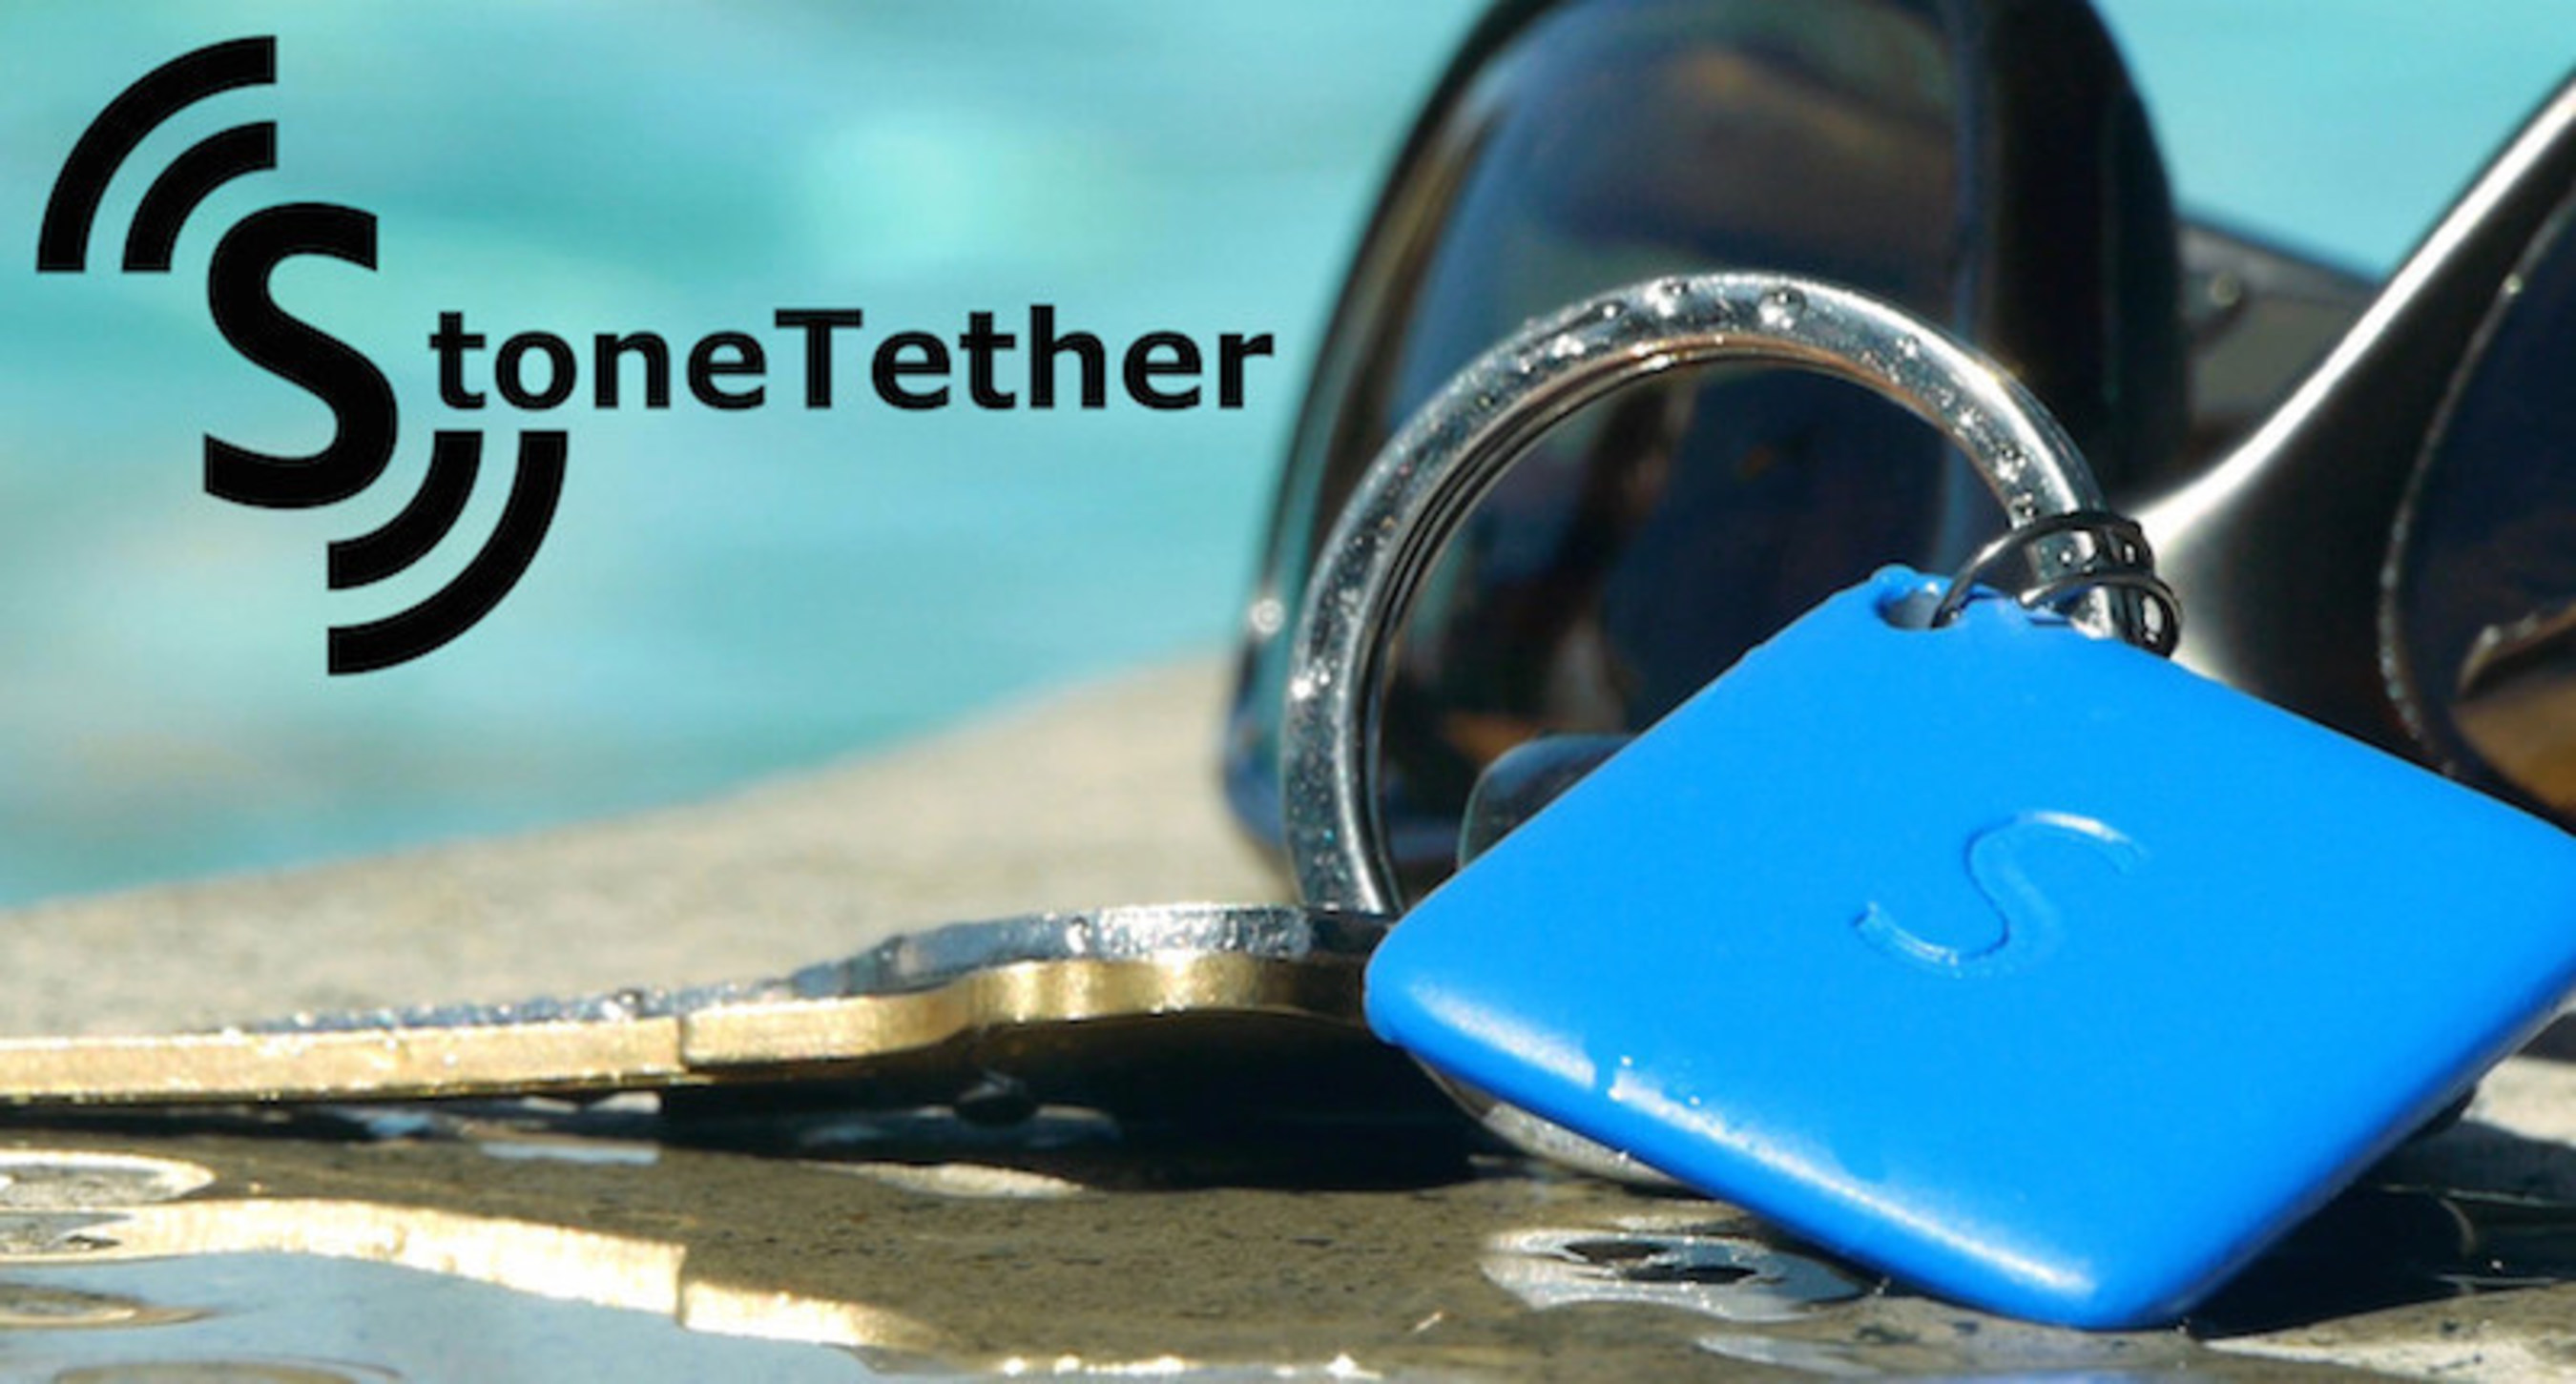 StoneTether is a premier Bluetooth Tracker that provides direction and distance to your pets, children, or items.